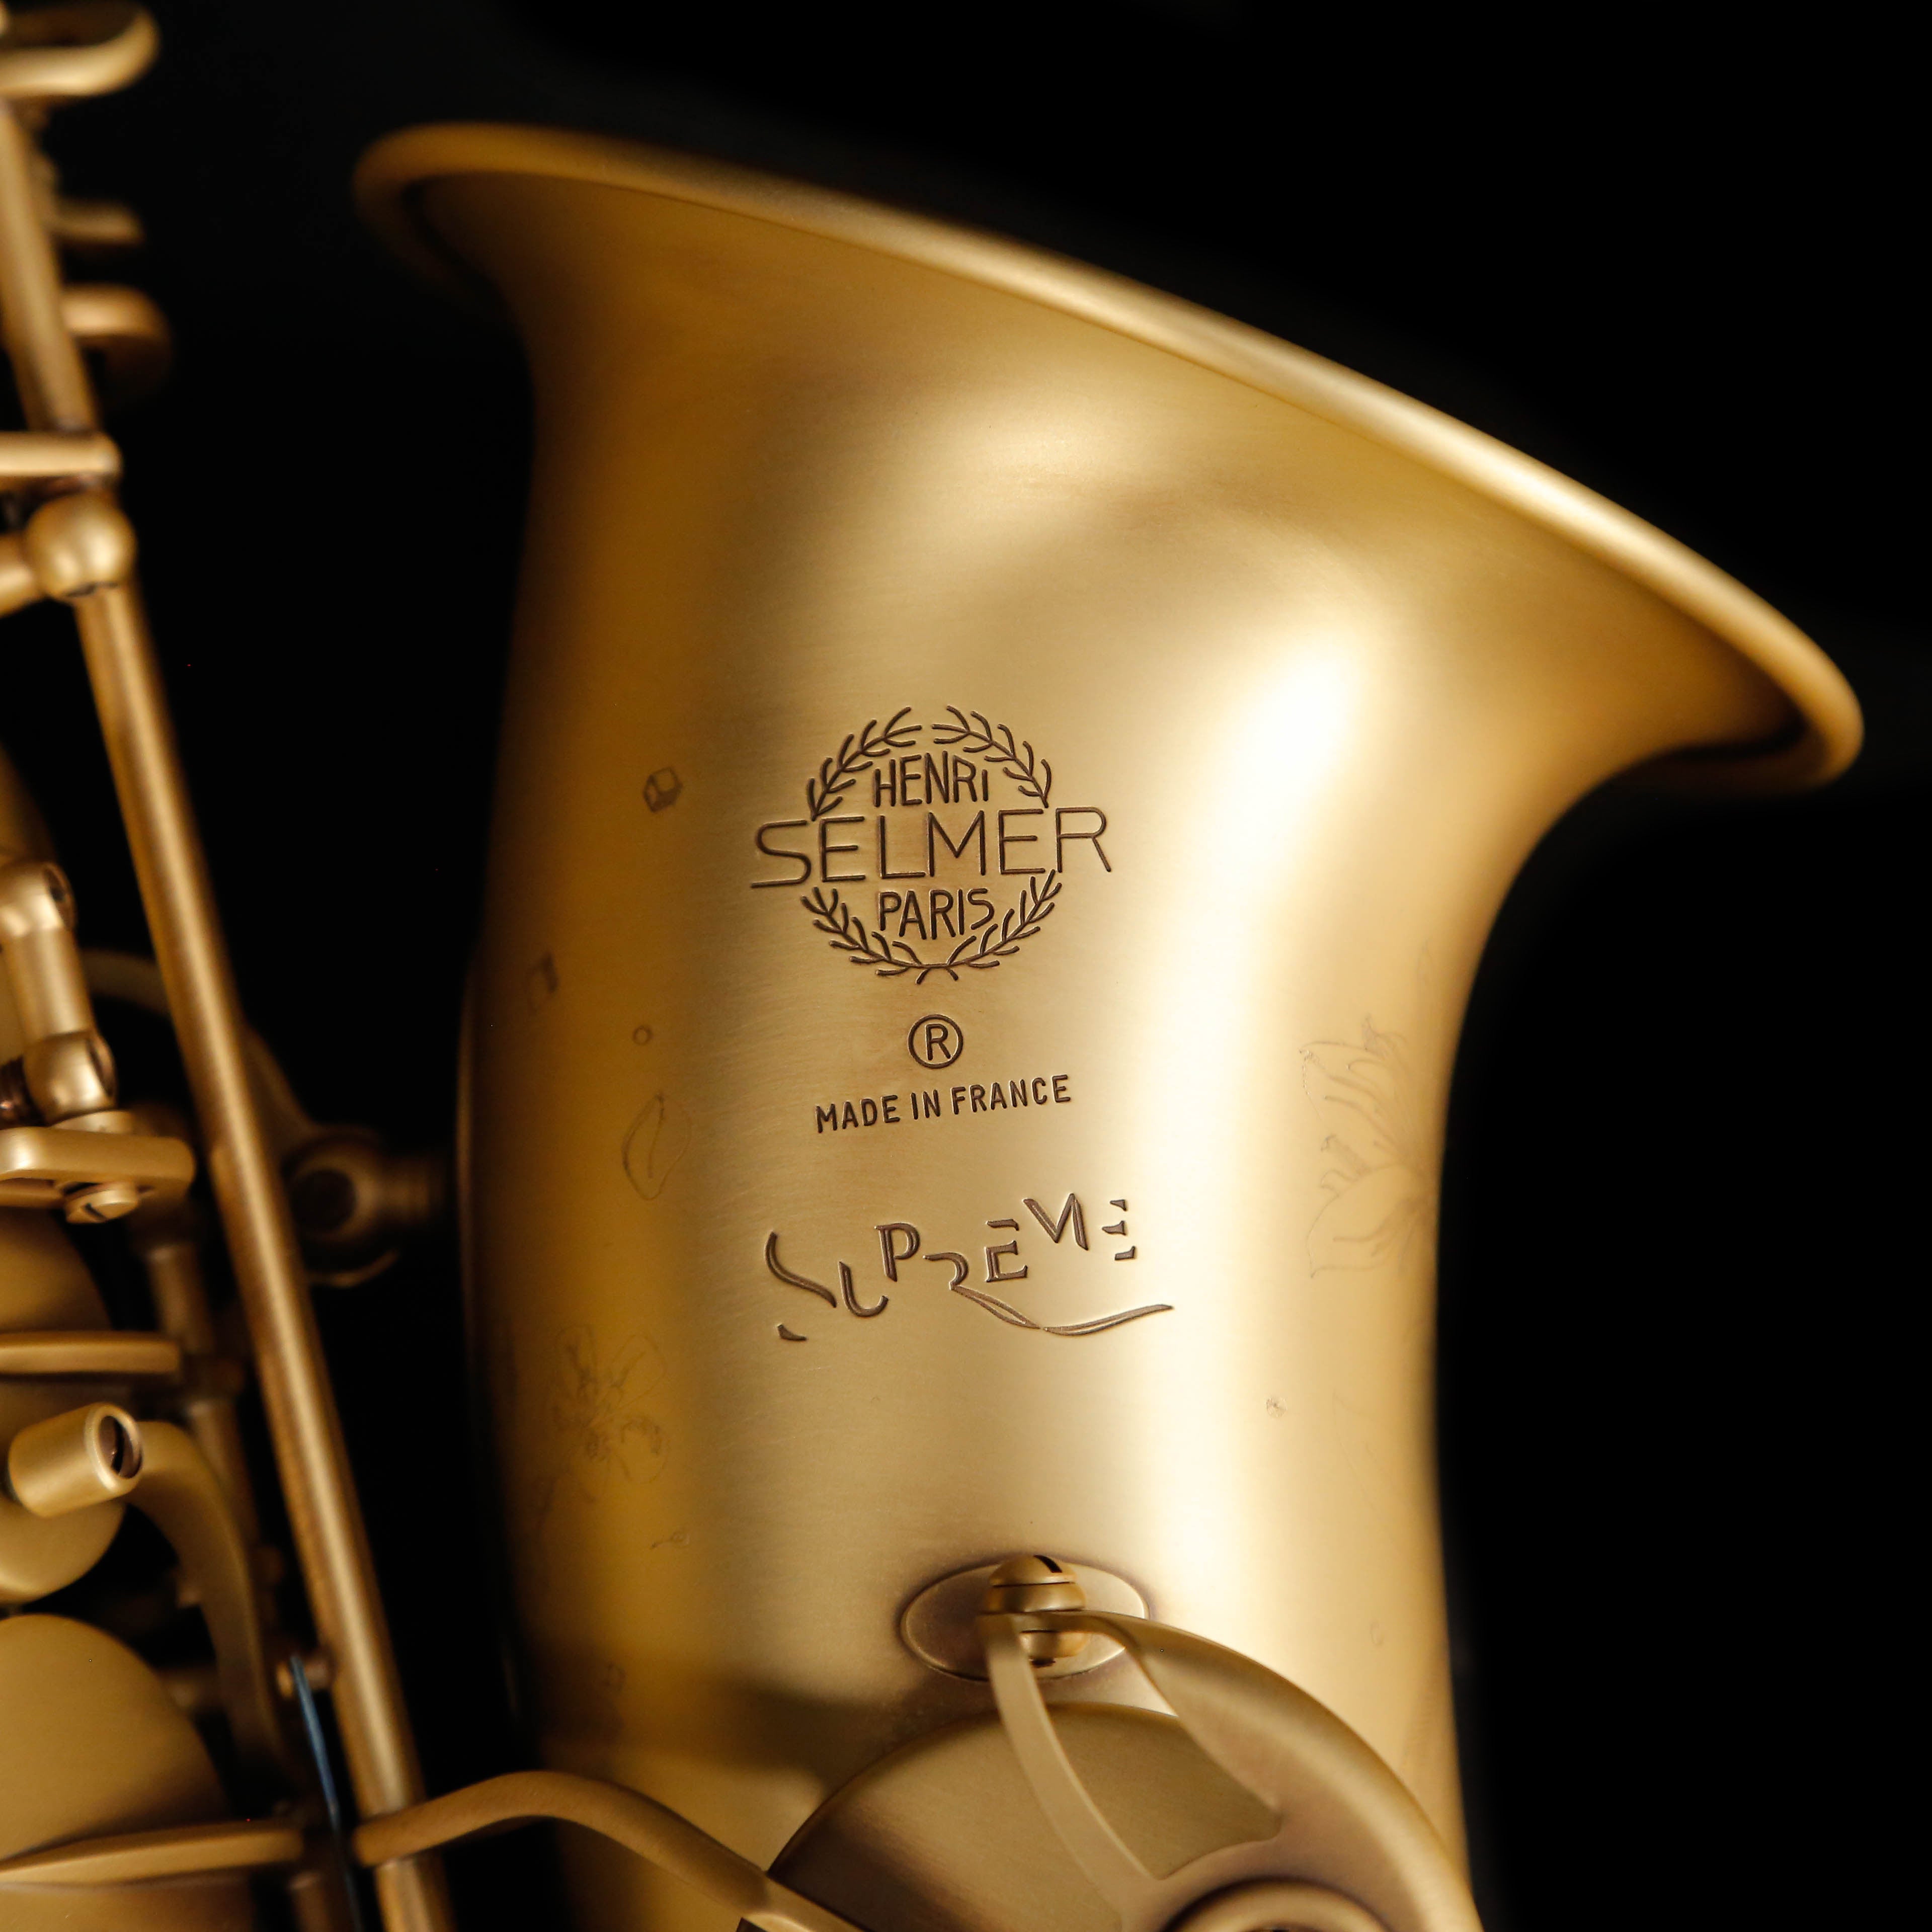 Purchase Vintage and Modern mini saxophone on Deals 